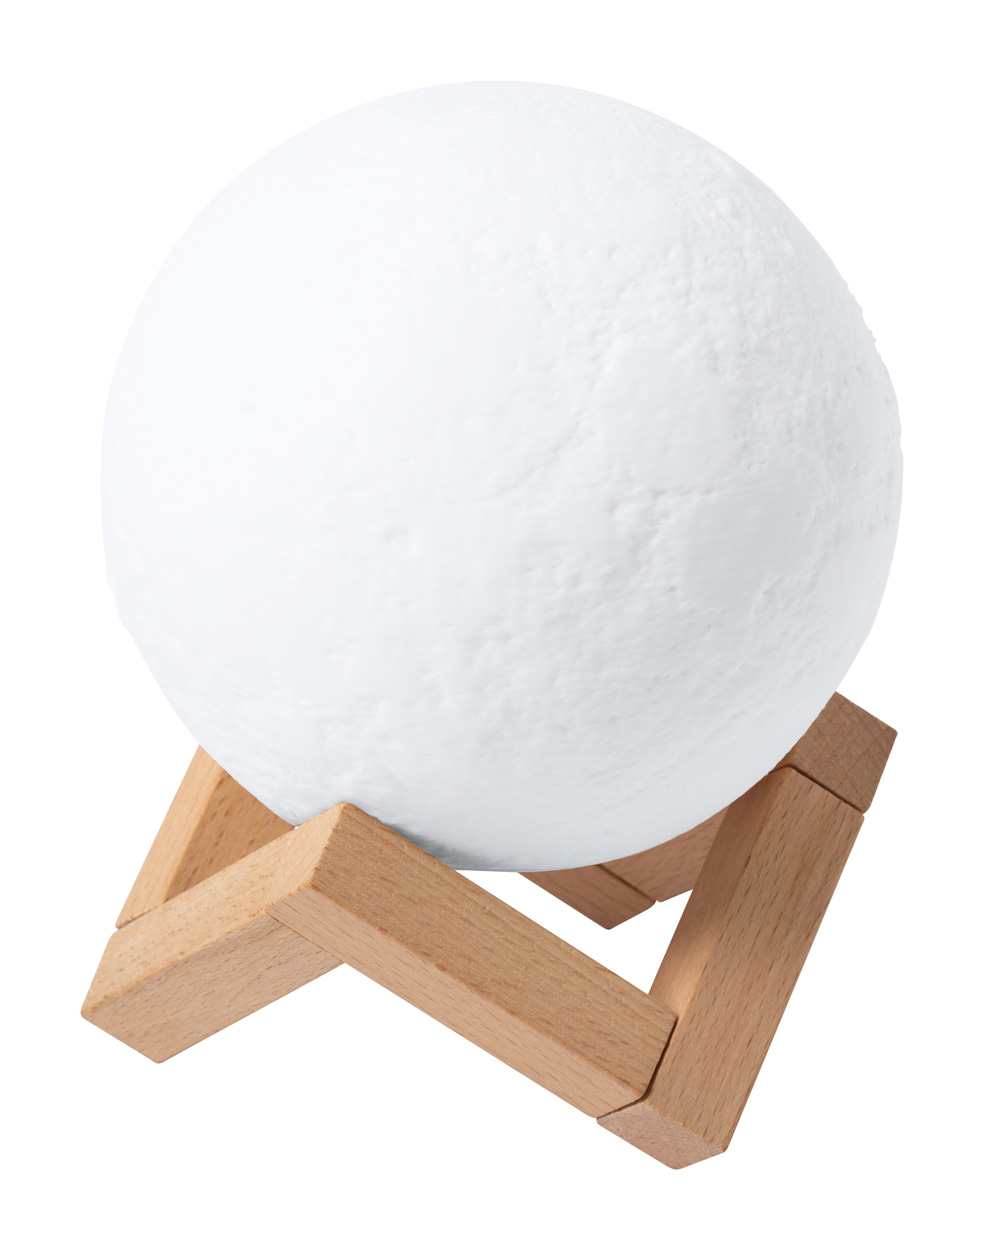 Plastic wireless speaker YOIS in the shape of the moon - white / natural